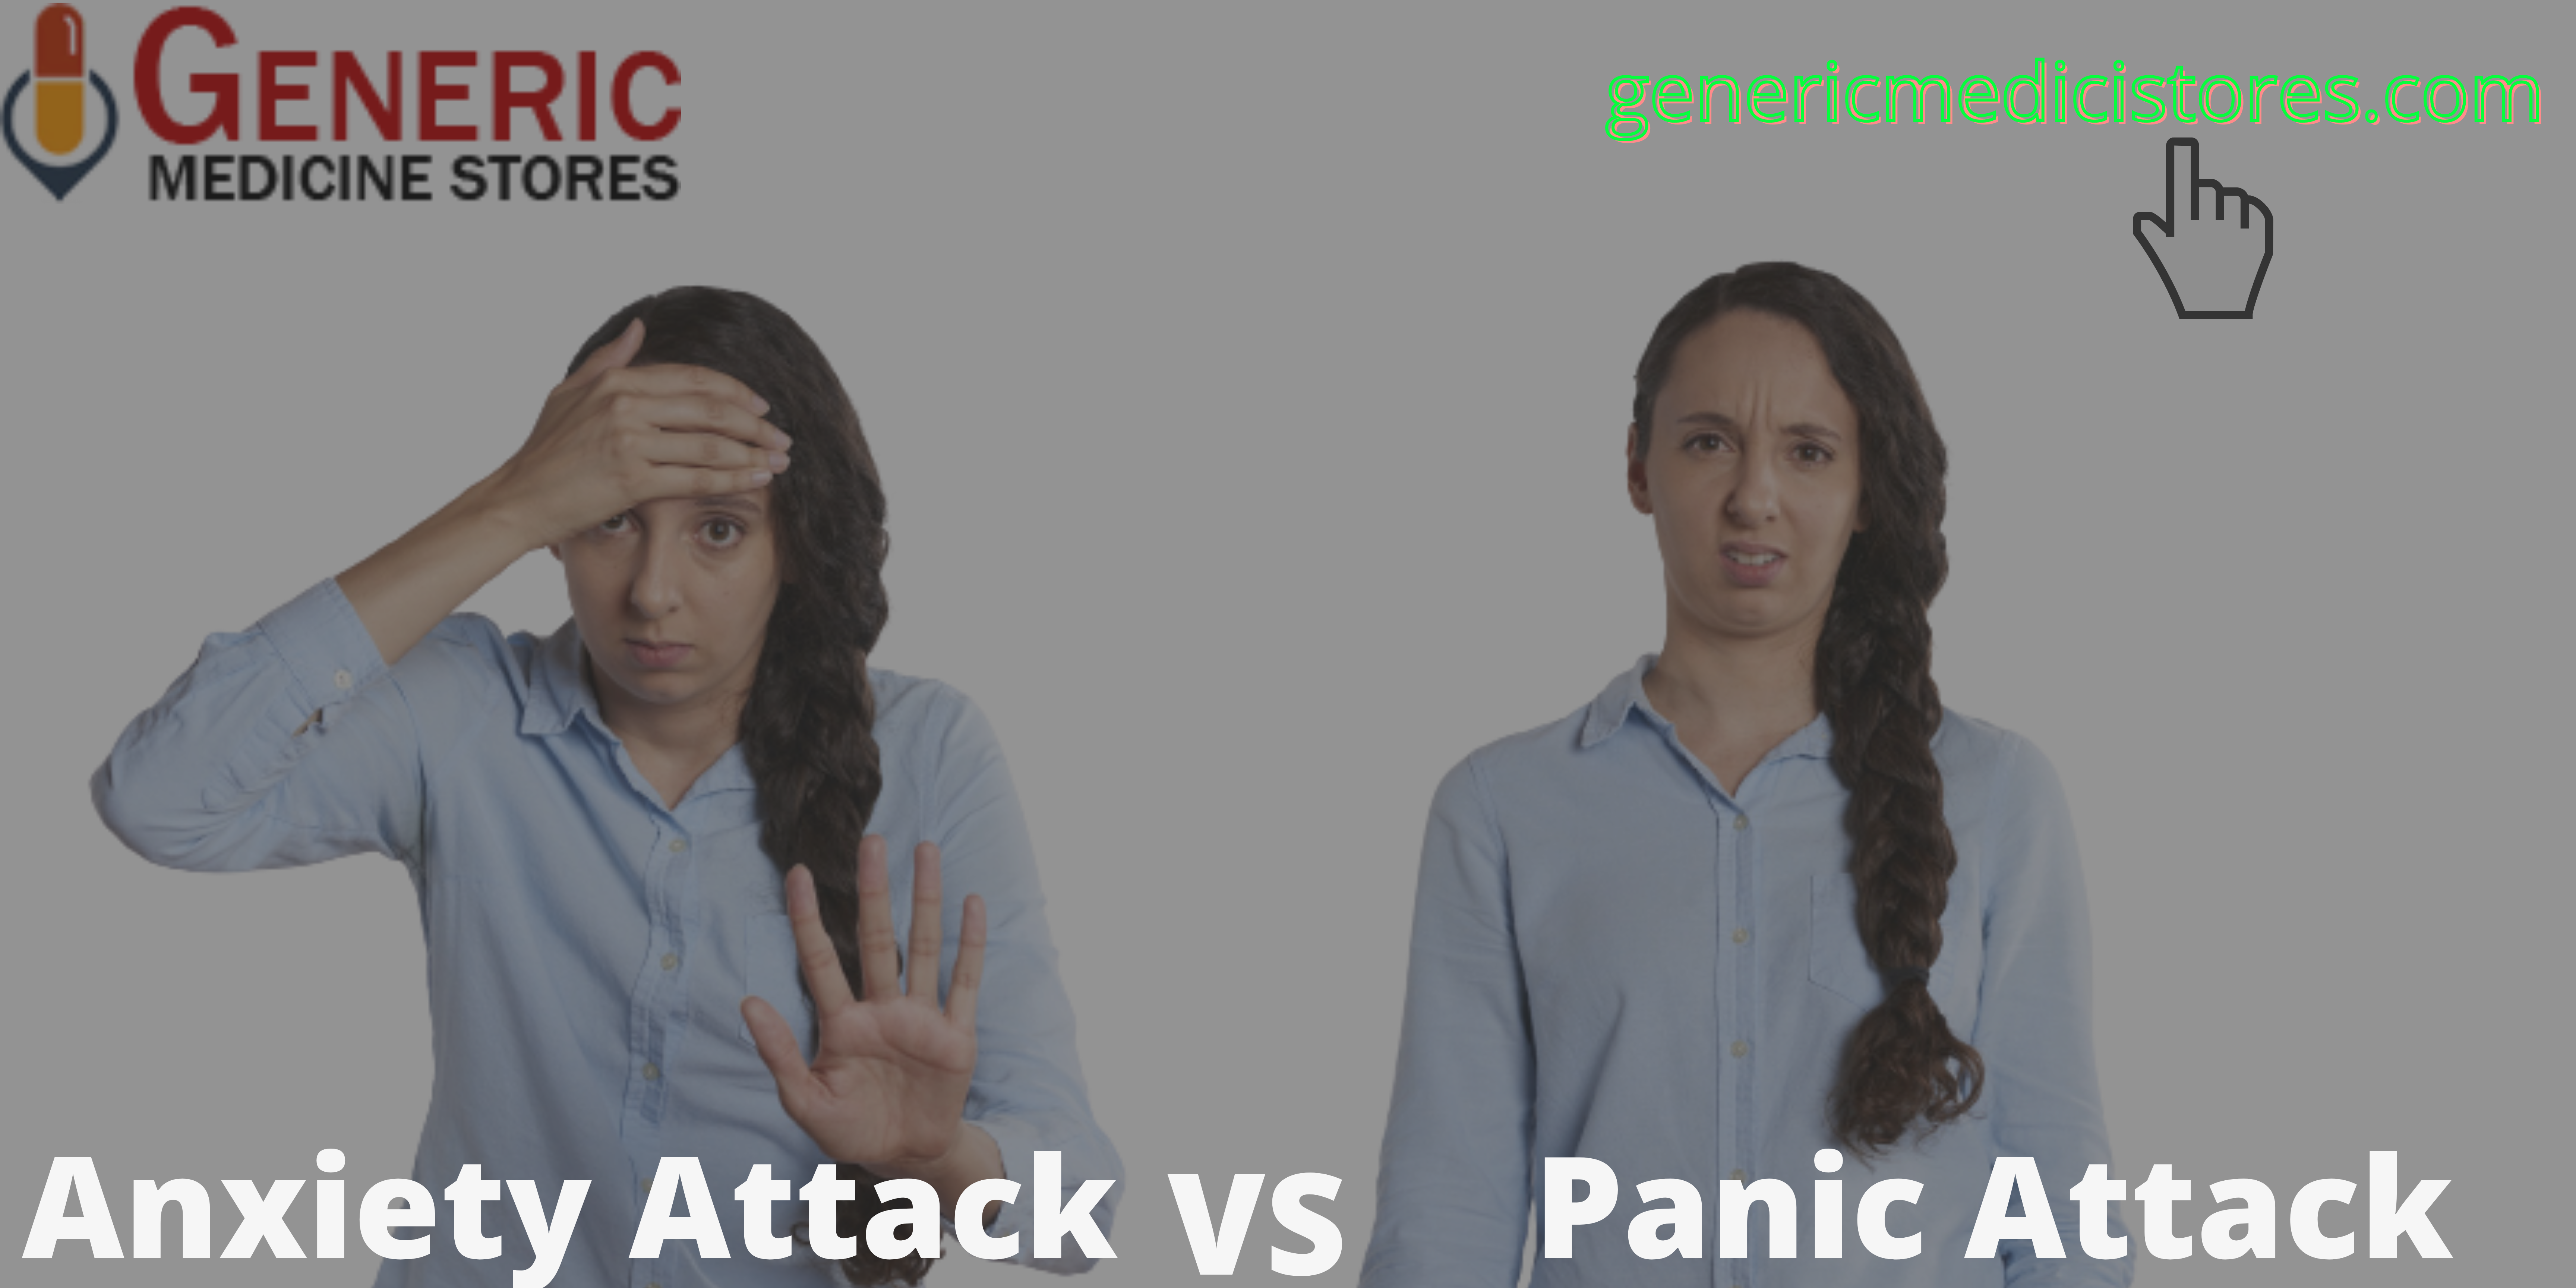 Panic attack vs. Anxiety attack: get to know more about the disorder.